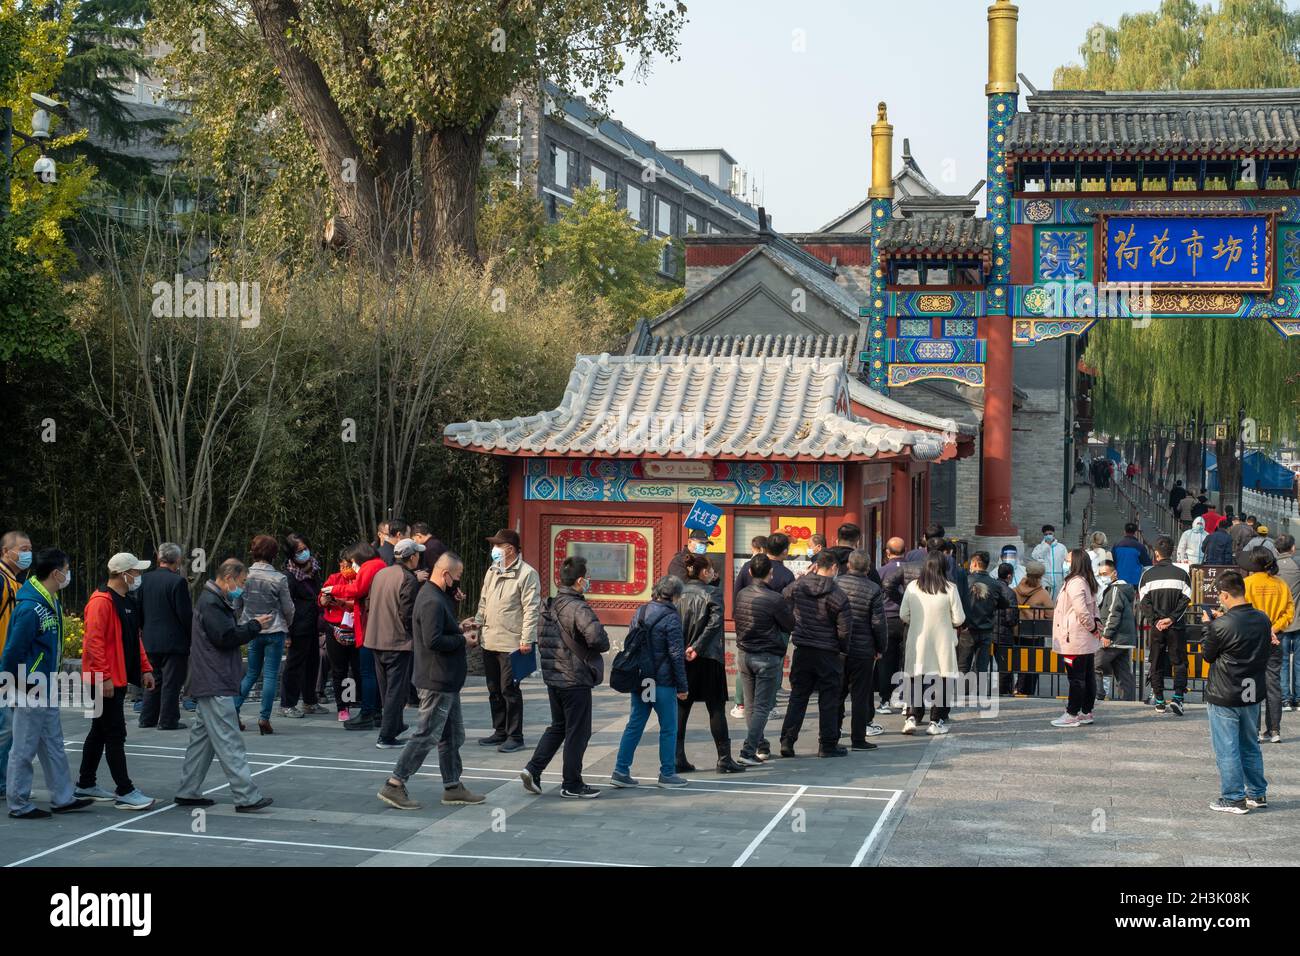 Residents line up to receive booster shots against COVID-19 at a vaccination site in Beijing, China. 29-Oct-2021 Stock Photo